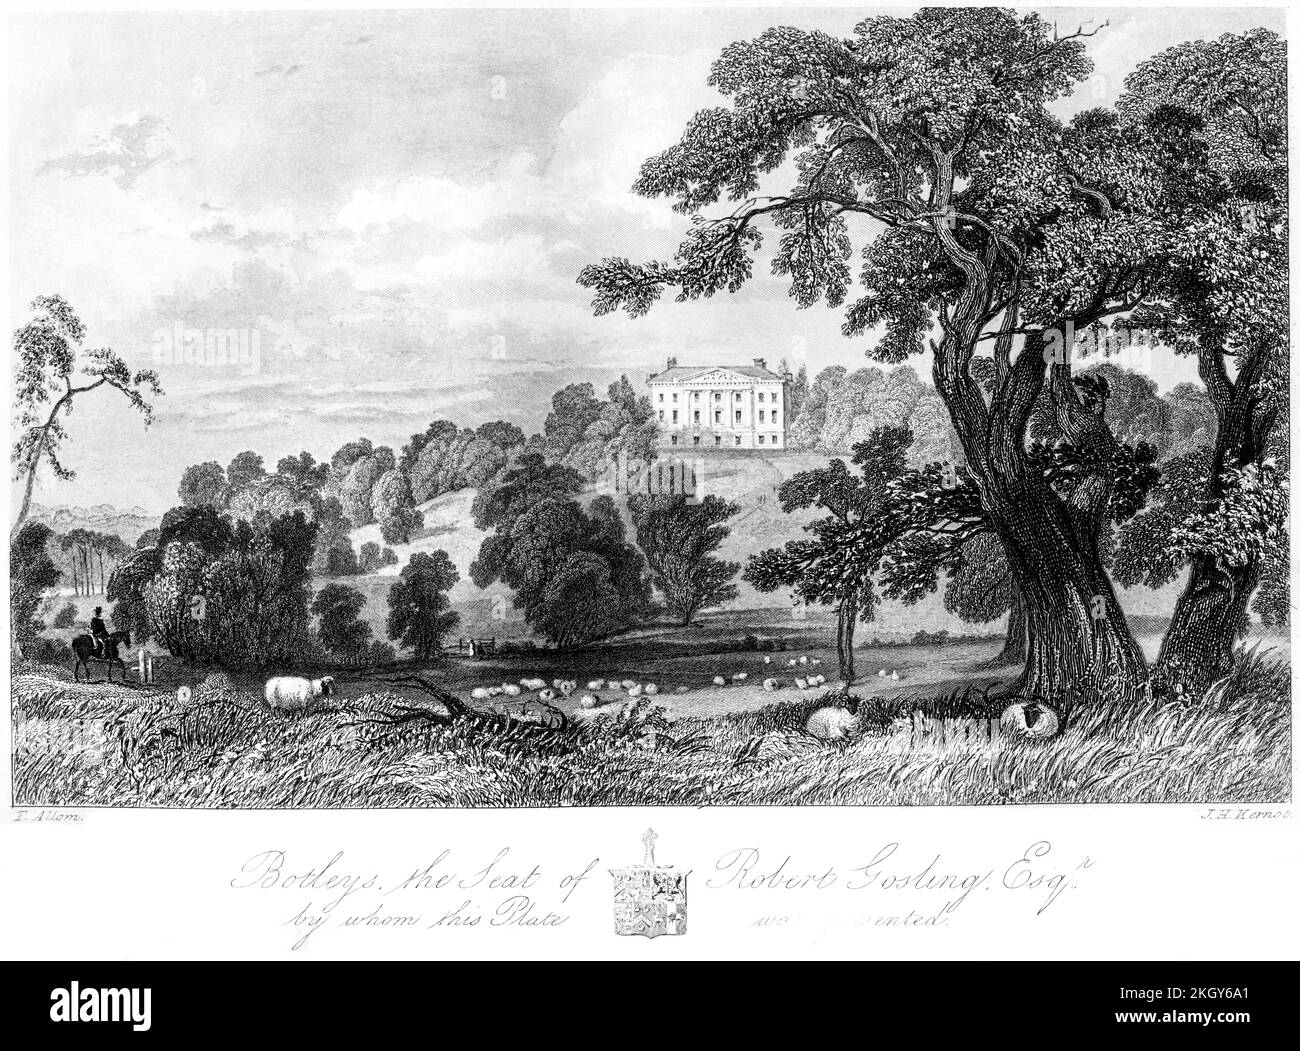 An engraving of Botleys, the Seat of Robert Gosling Esq., Surrey UK scanned at high resolution from a book printed in 1850. Believed copyright free. Stock Photo